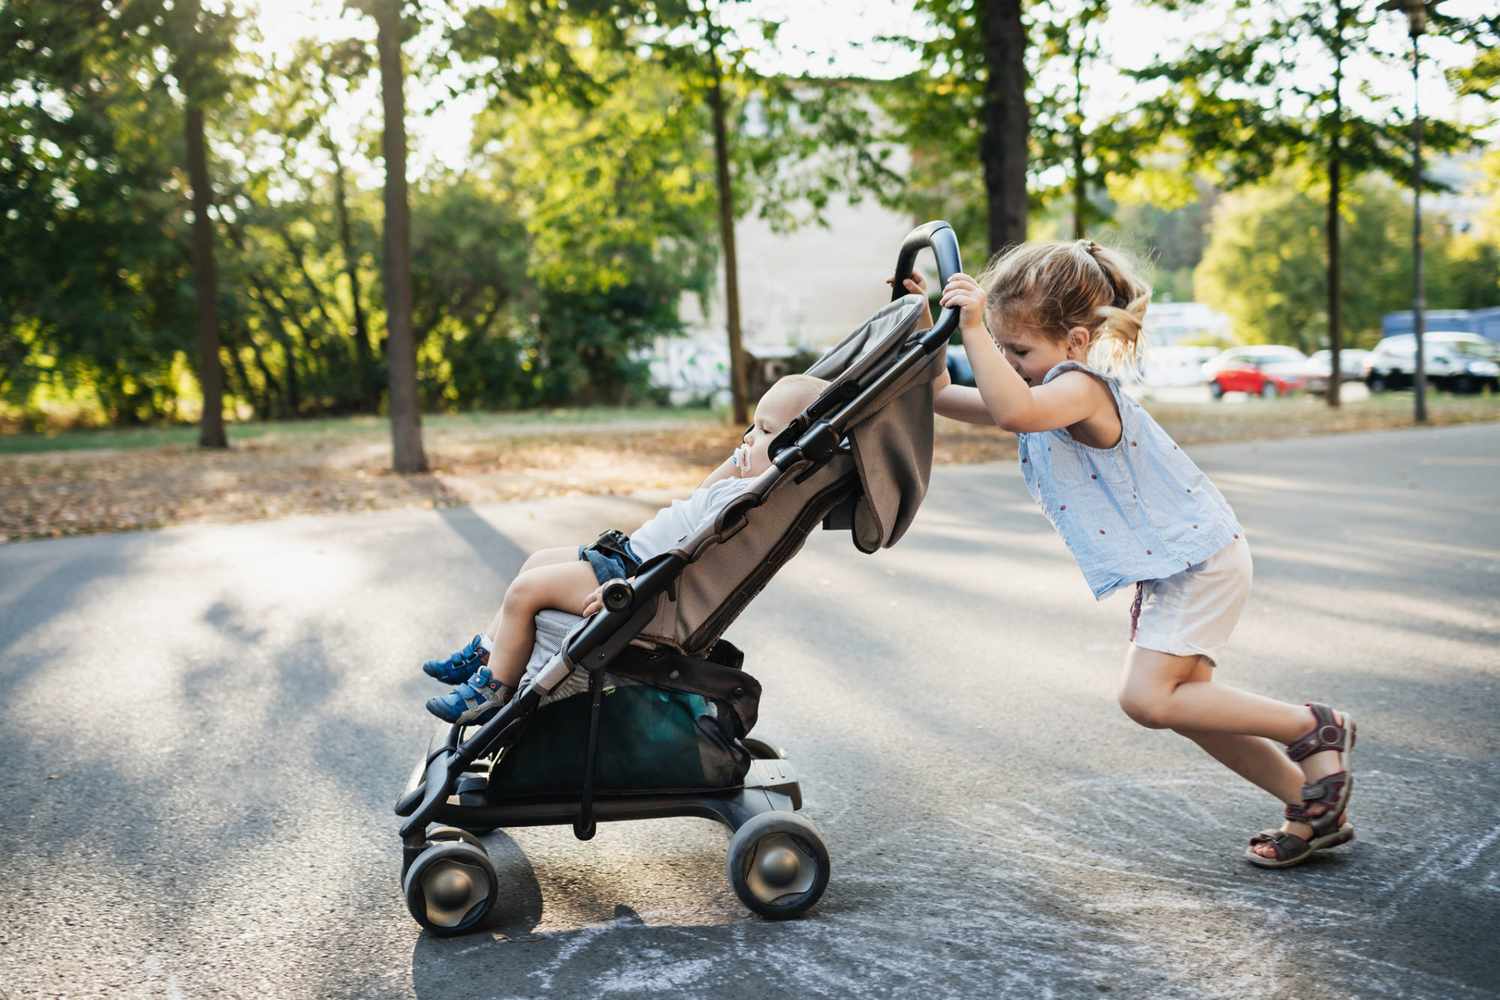 An image of a child pushing a toddler in a stroller.